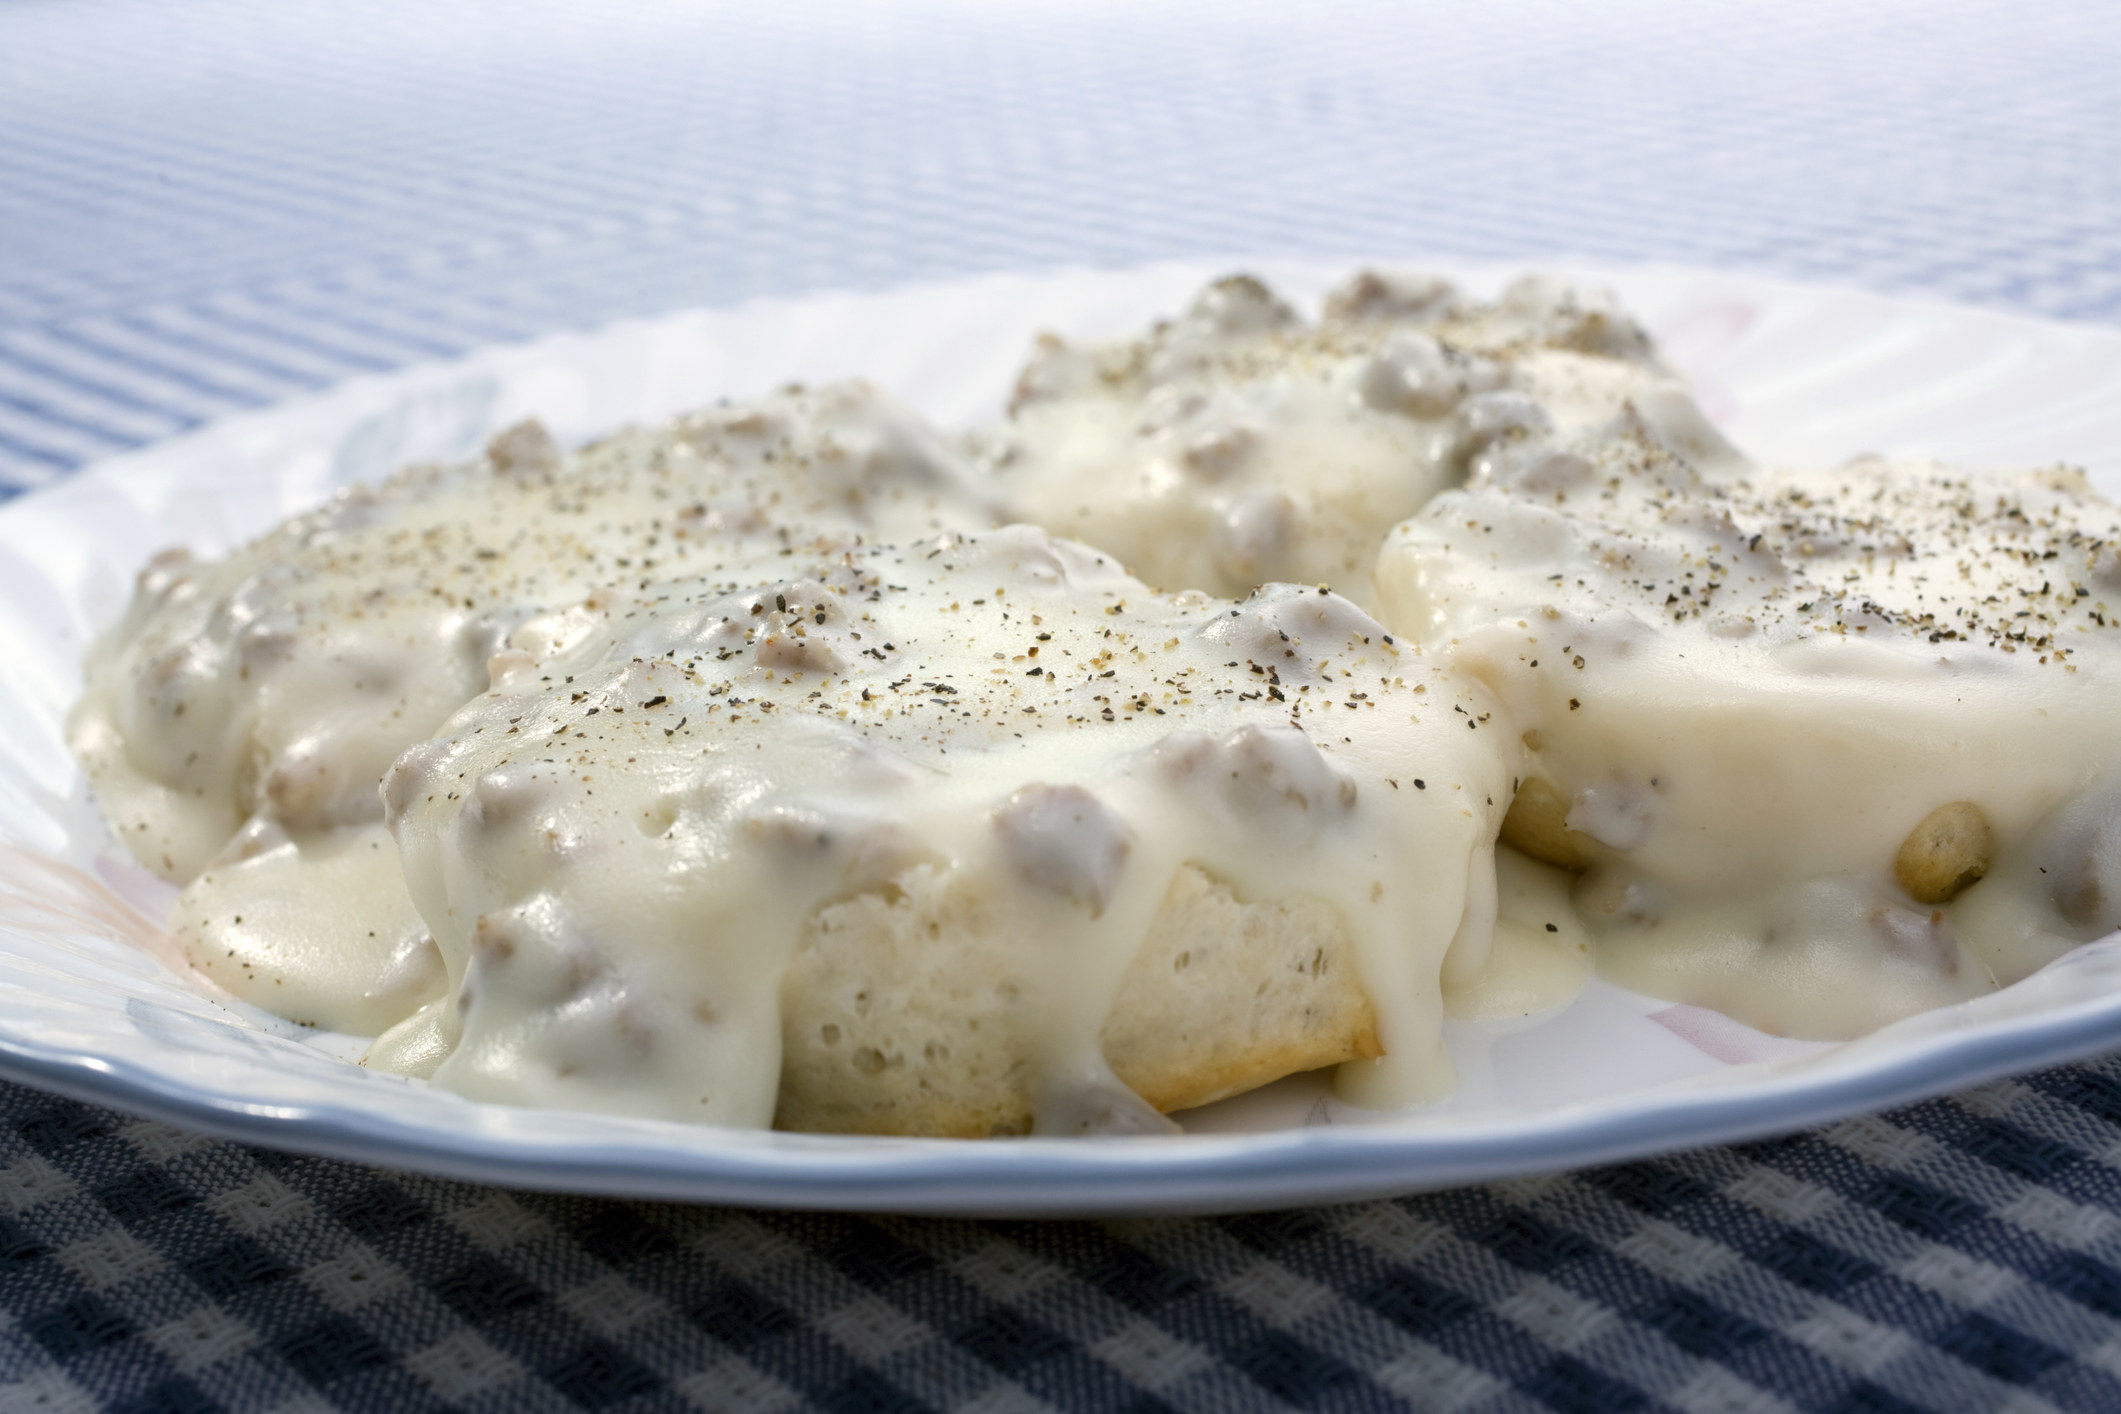 Biscuits and gravy.